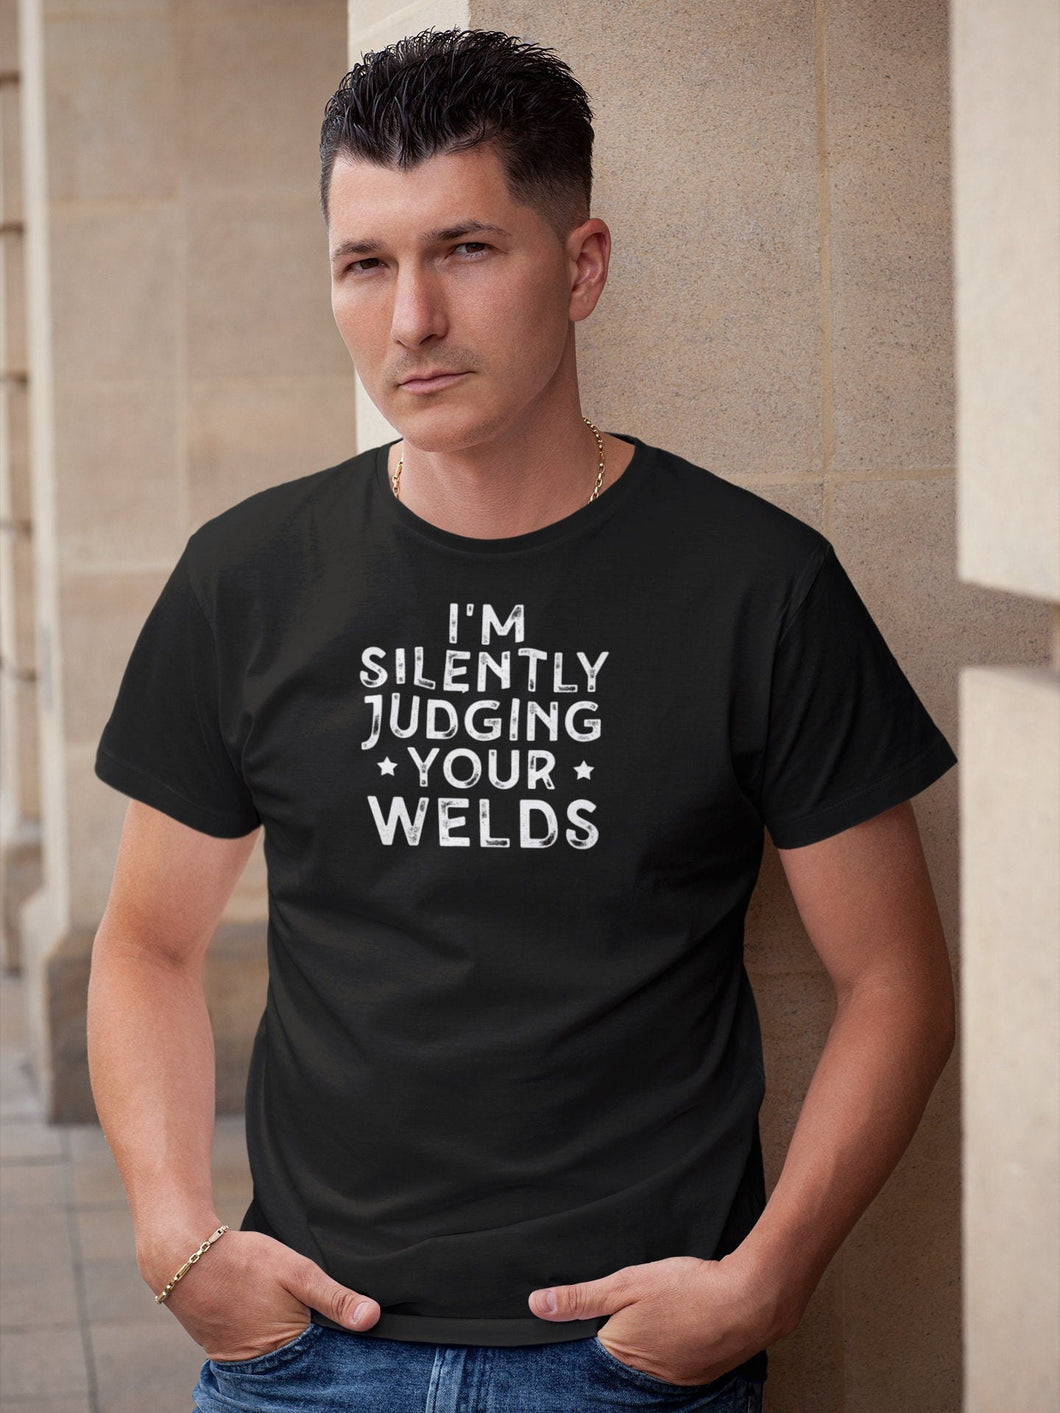 I'm Silently Judging Your Welds Shirt Funny Welder Shirt, Funny Welder Gifts, Gift For Welder Vintage